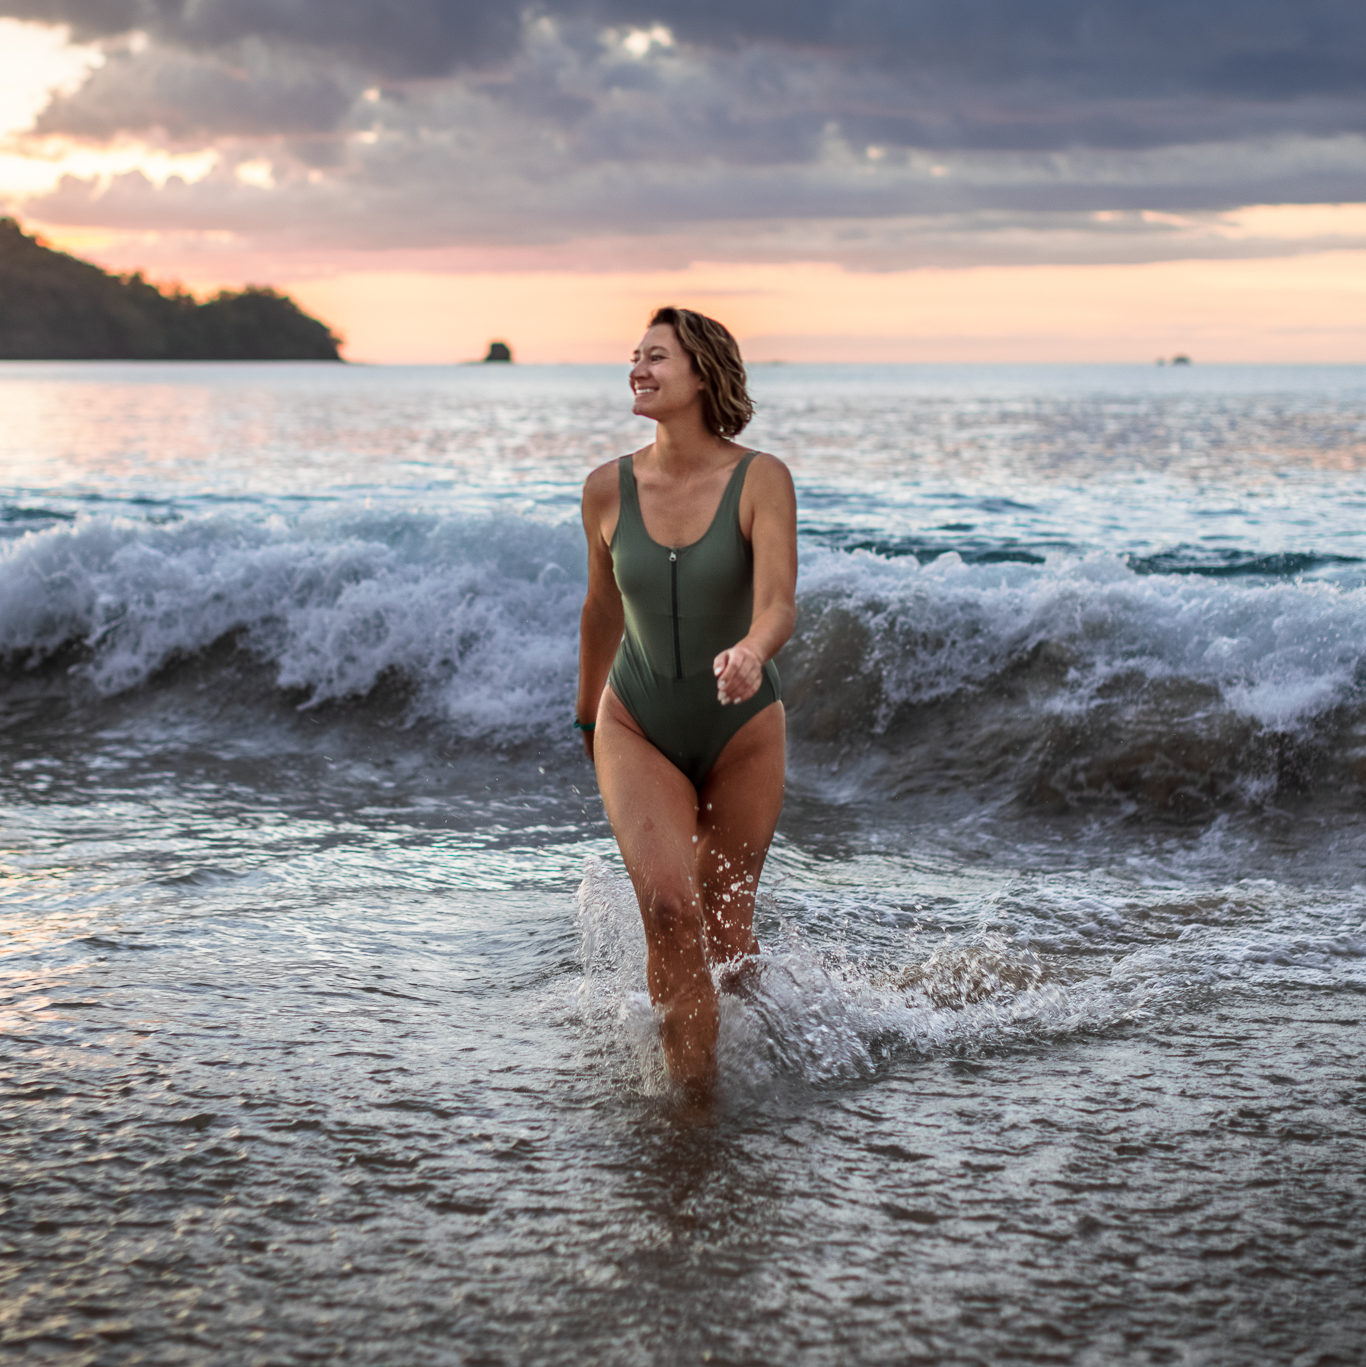 Woman wearing green swimsuit walks through ocean waves at sunset in Costa Rica. Outfit is part of a Costa Rica vacation lookbook.